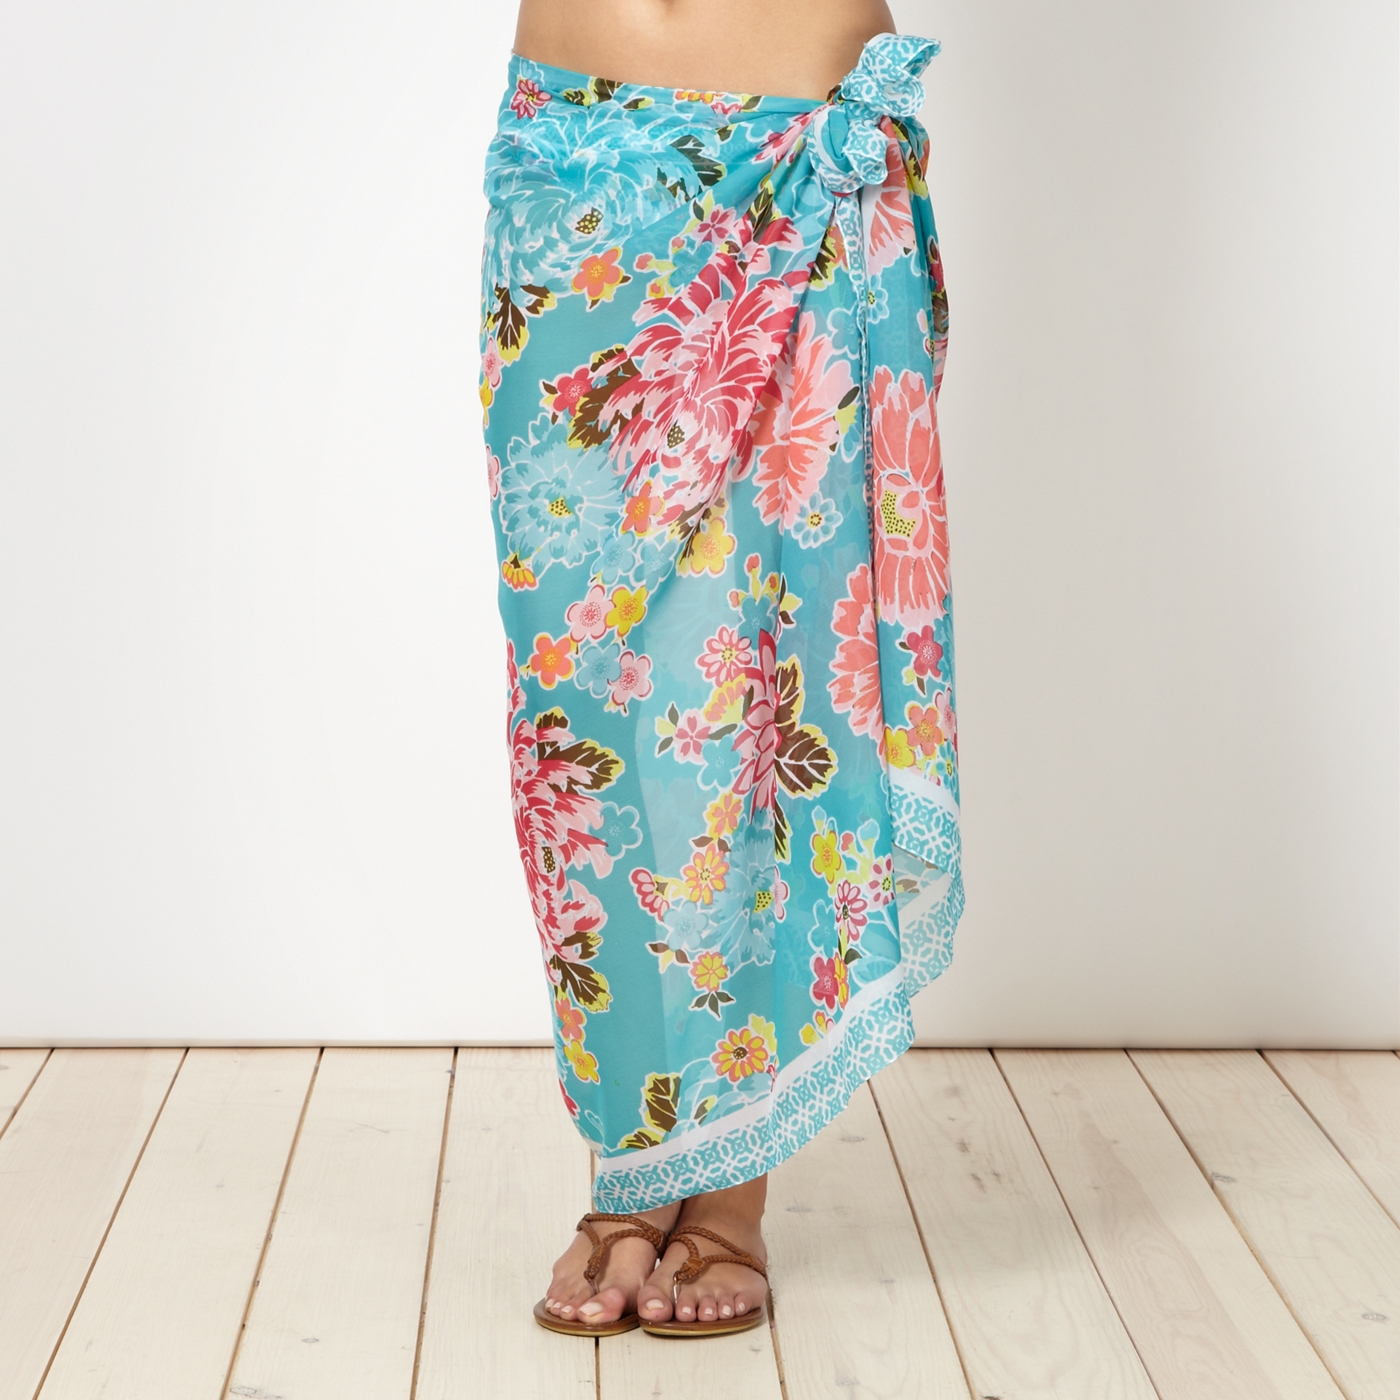 Beach Collection Turquoise floral sarong